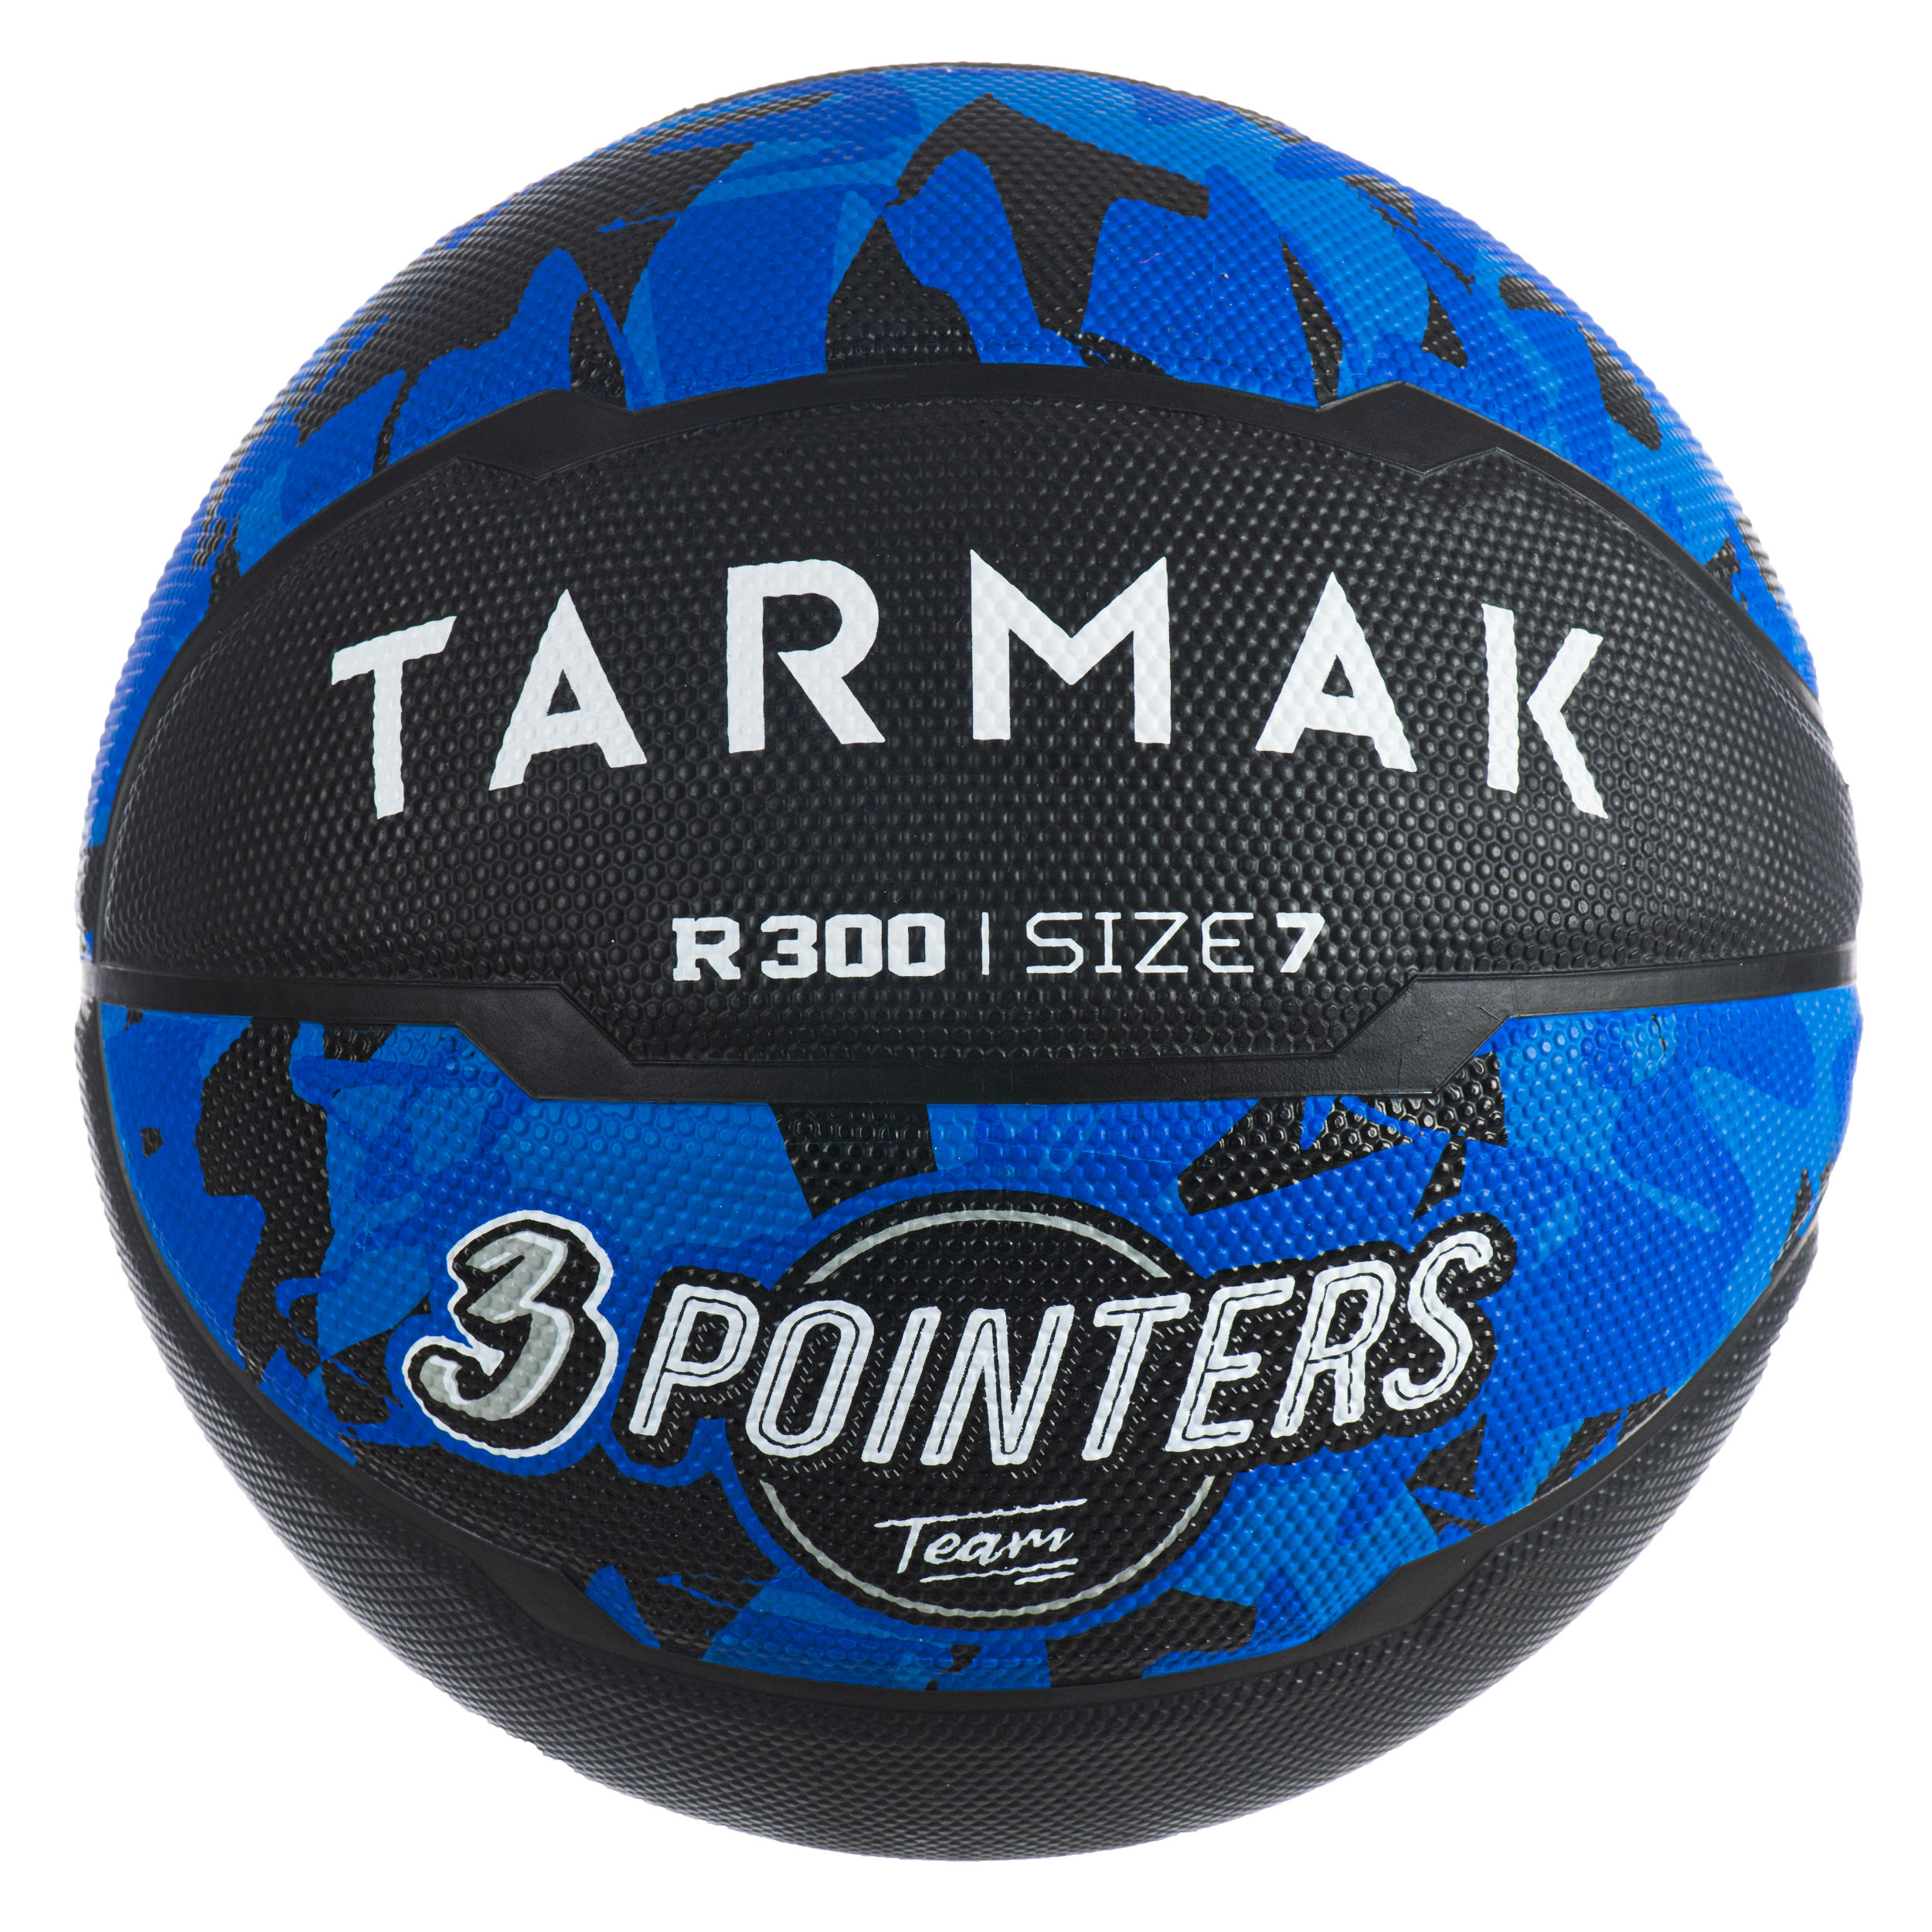 R300 Size 7 Basketball for Beginners 